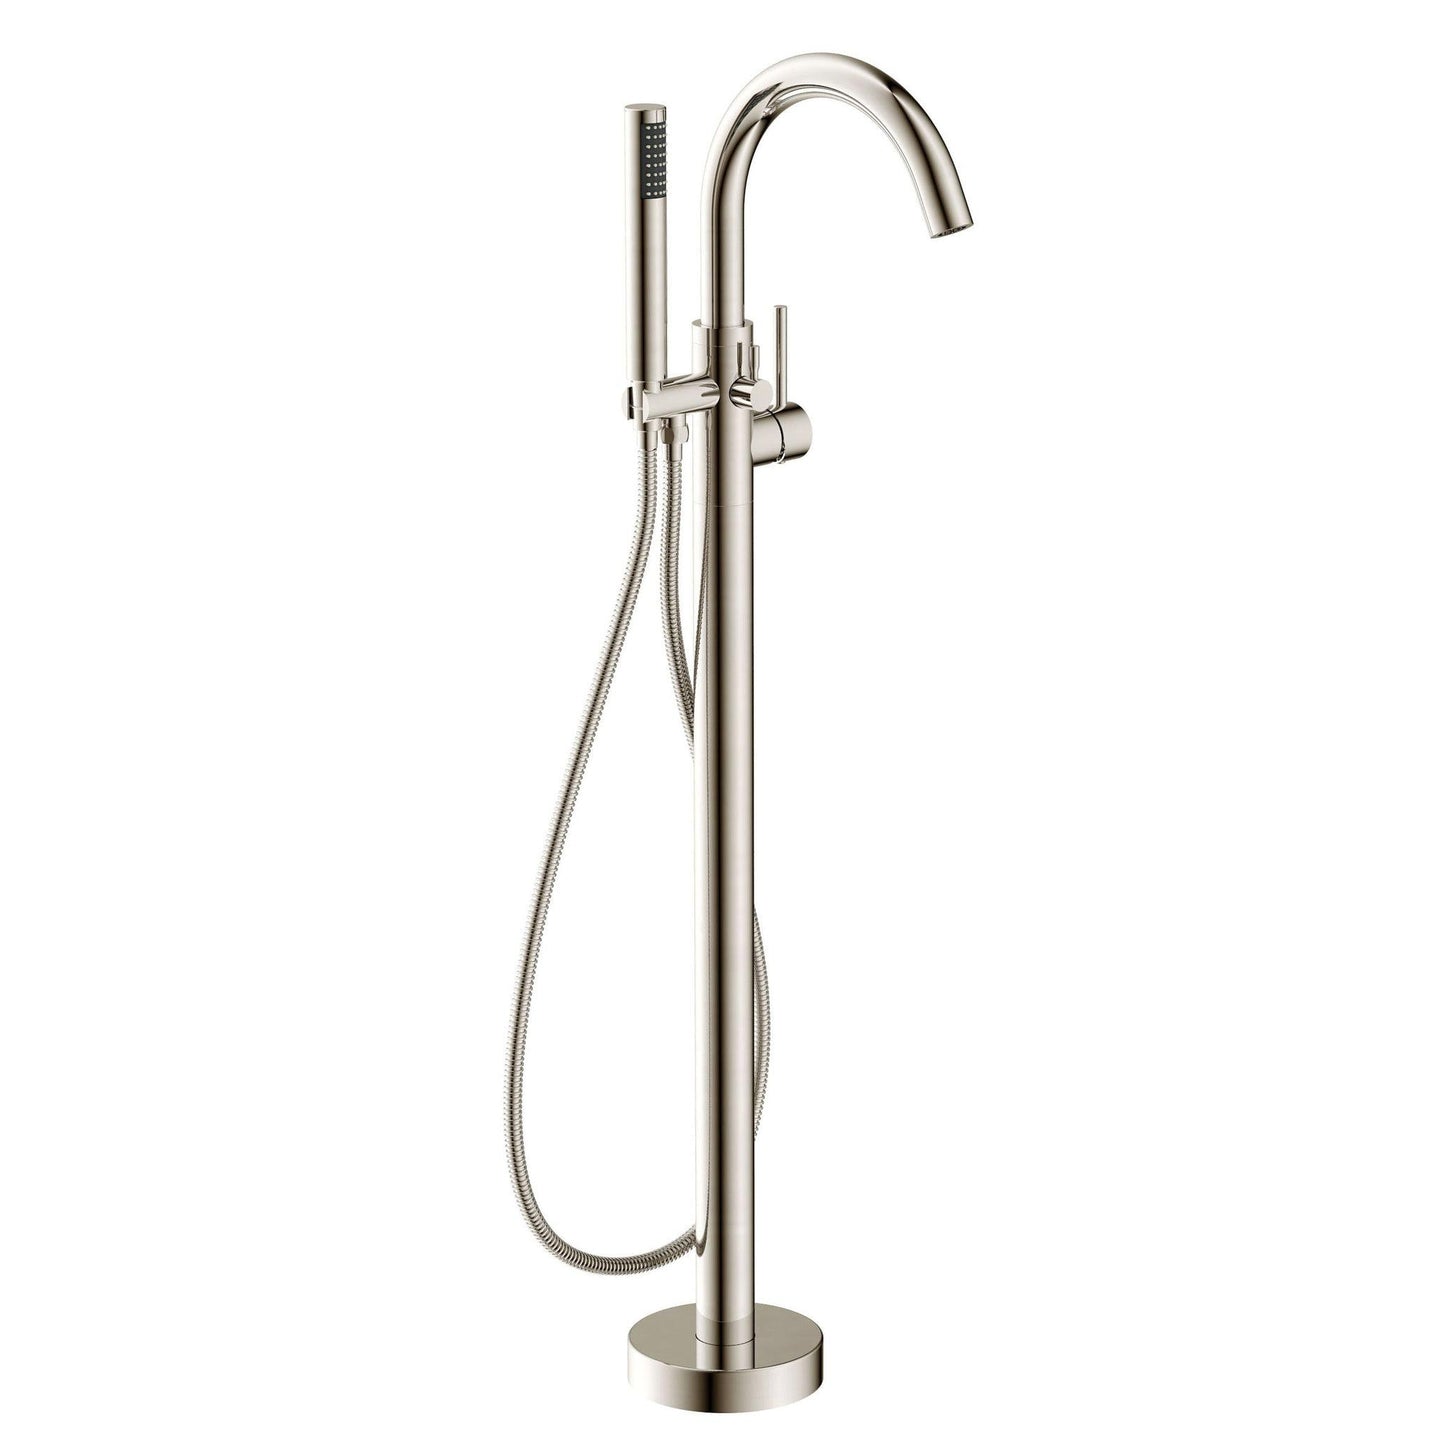 ANZZI Coral Series 2-Handle Brushed Nickel Clawfoot Tub Faucet With Euro-Grip Handheld Sprayer